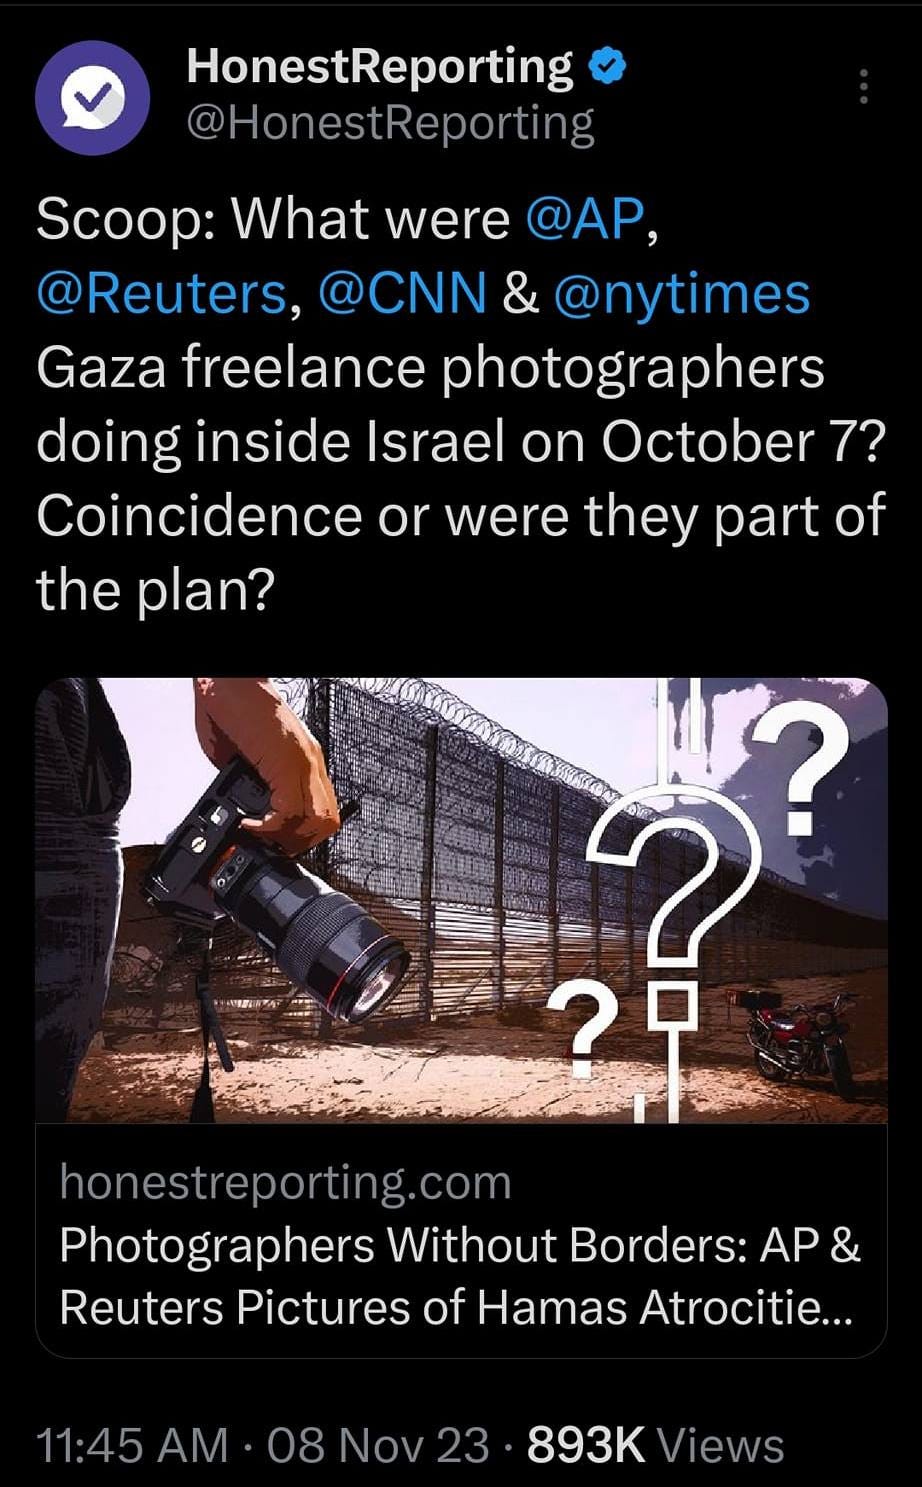 May be an image of ‎2 people and ‎text that says '‎3:47 ← 4G 100% Post HonestReporting @HonestReporting Scoop: What were @AP, Reuters, @CNN & @nytimes Gaza freelance photographers doing inside Israel on October 7? Coincidence or were they part of the plan? honestreporting.com Photographers Without Borders: AP Reuters Pictures of Hamas Atrocitie... 08 893K Views Post ۔u‎'‎‎